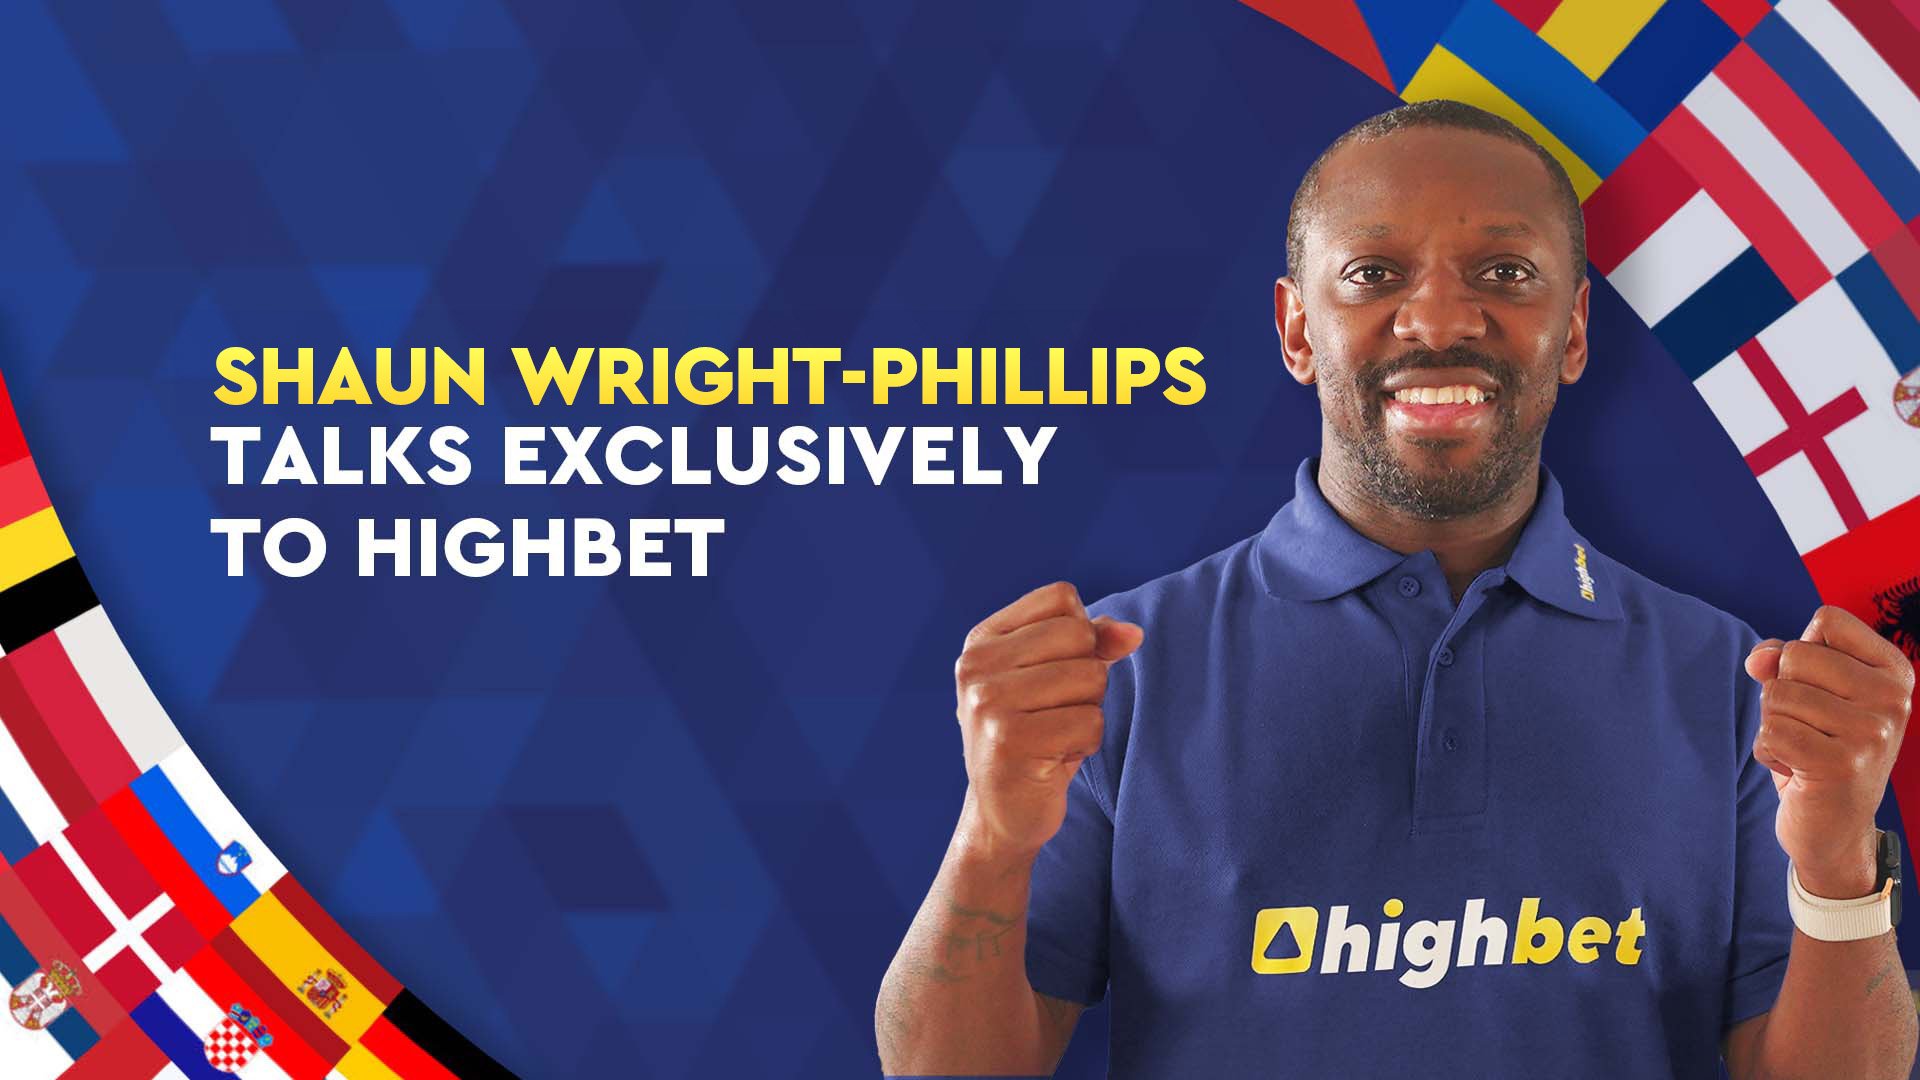 Video: SHAUN WRIGHT-PHILLIPS TALKS EXCLUSIVELY TO HIGHBET